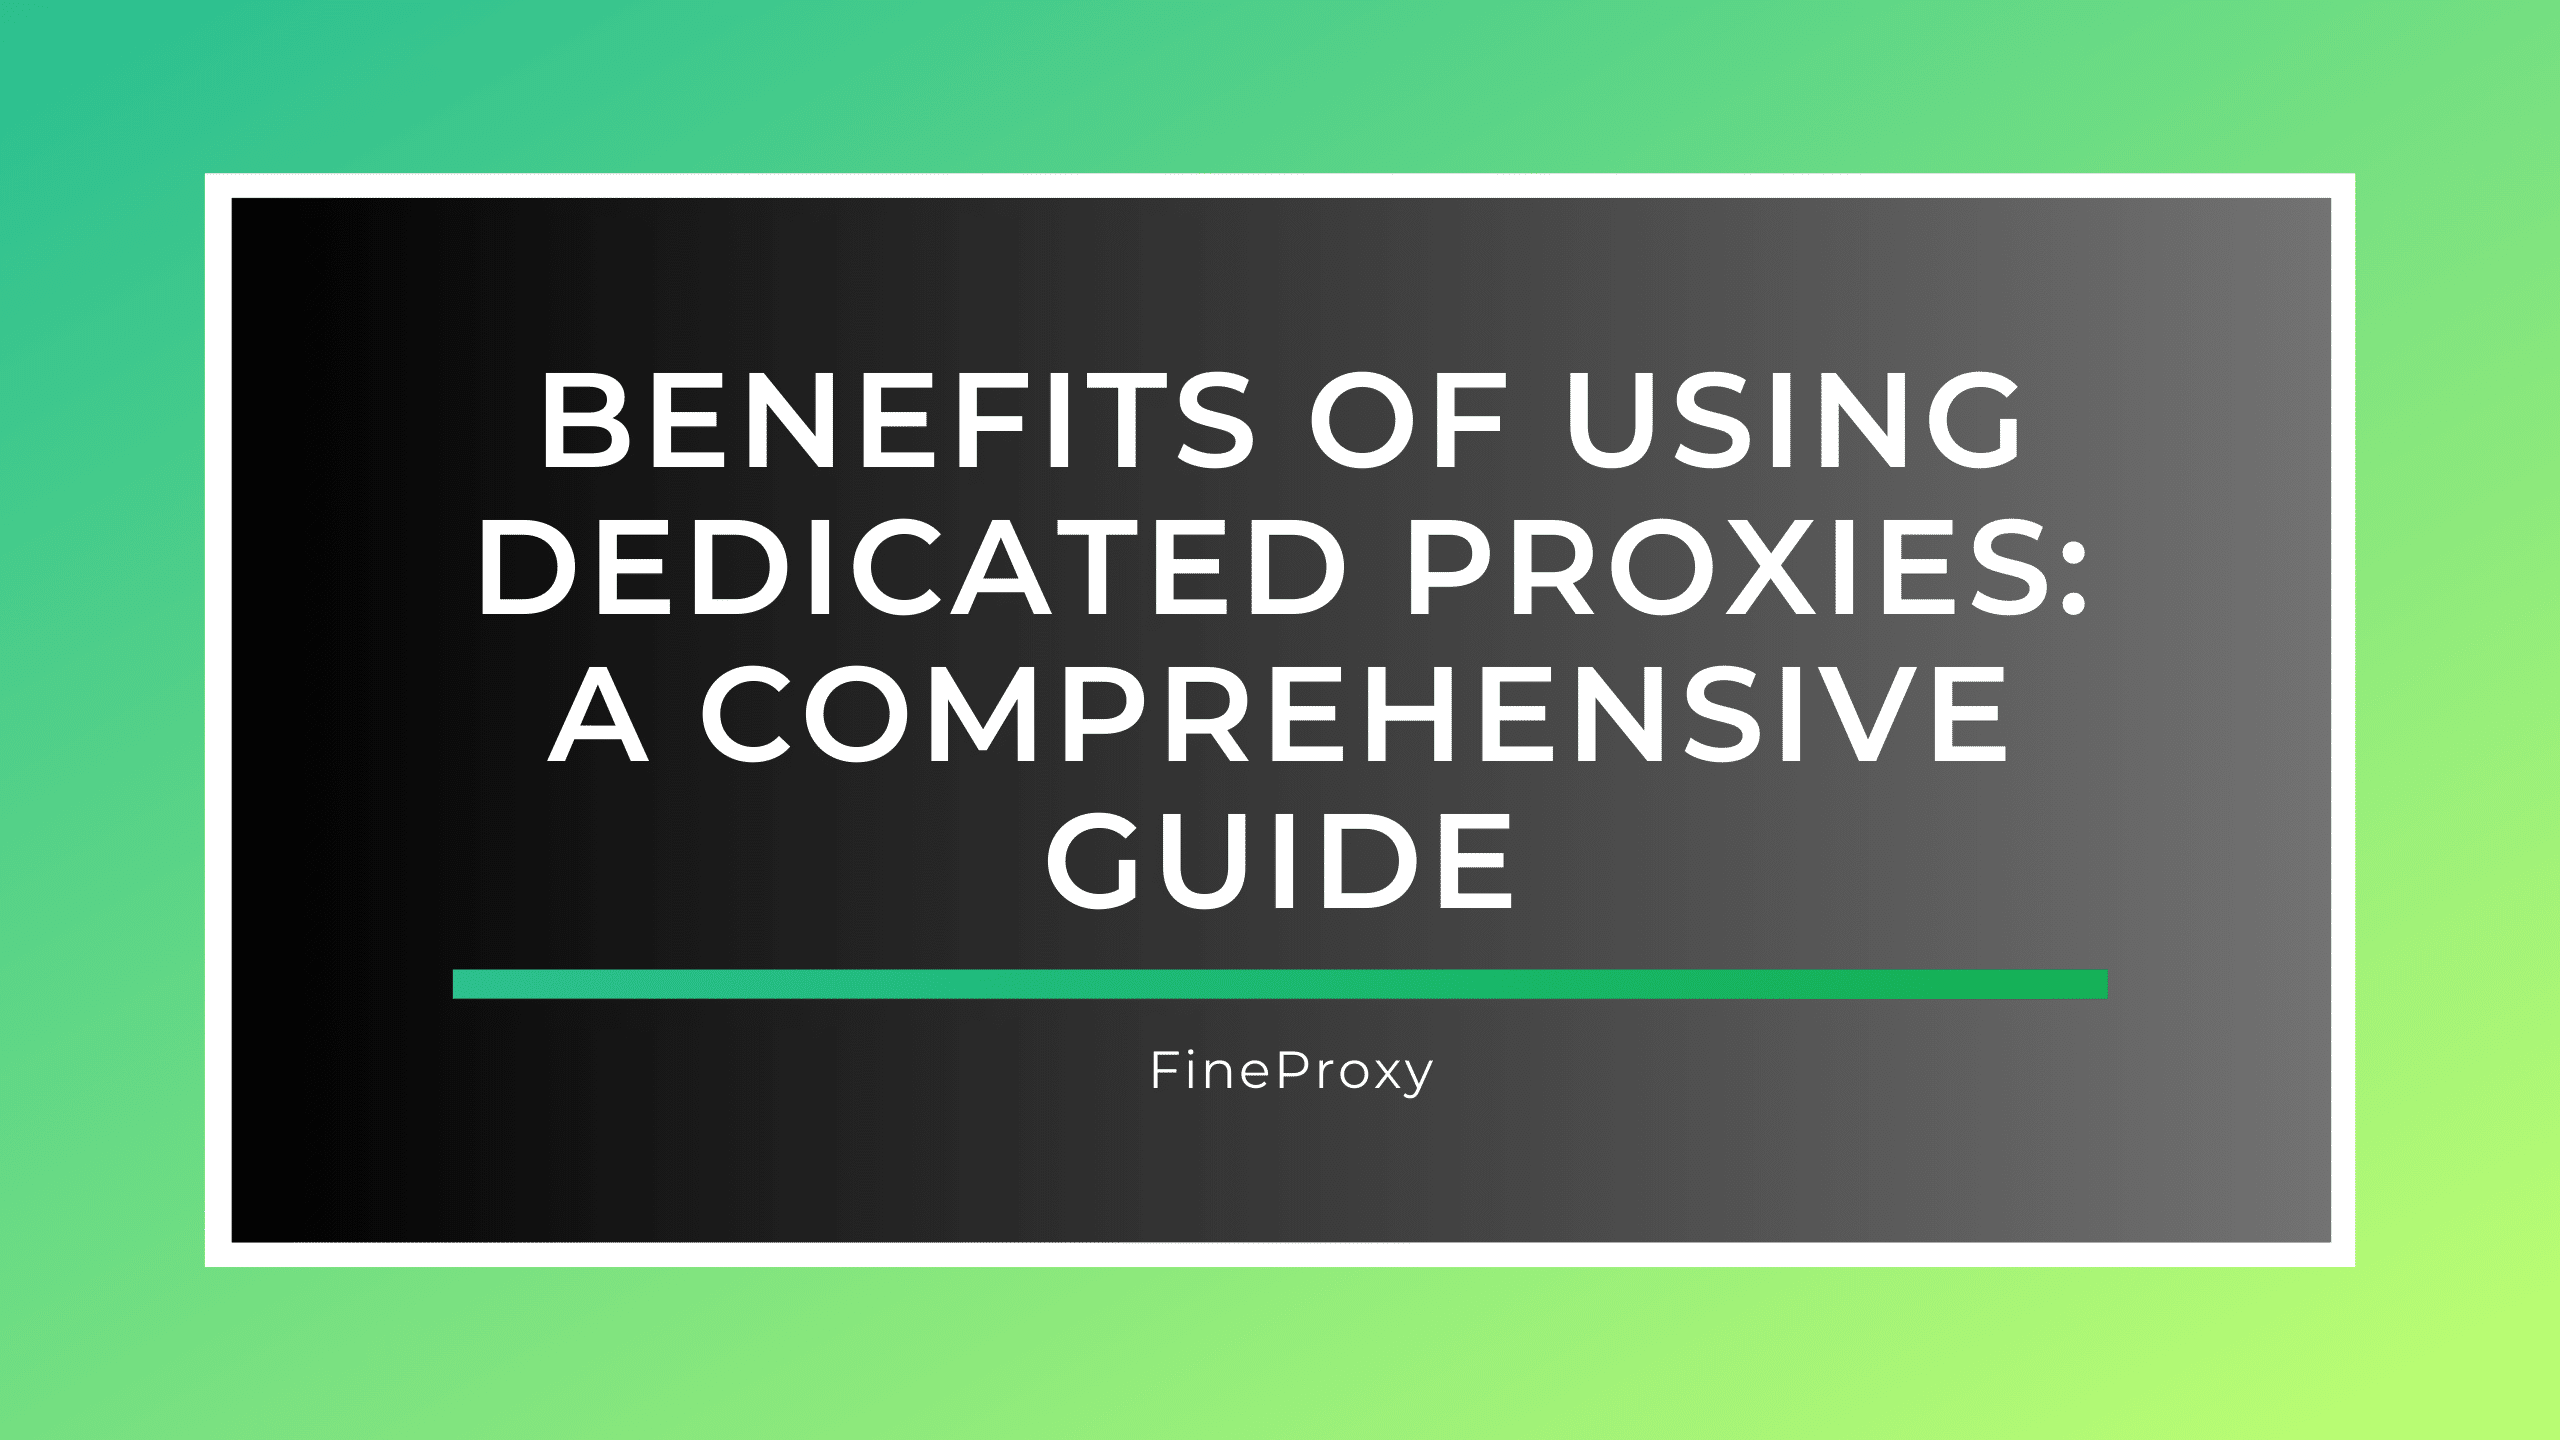 Benefits of Using Dedicated Proxies: A Comprehensive Guide